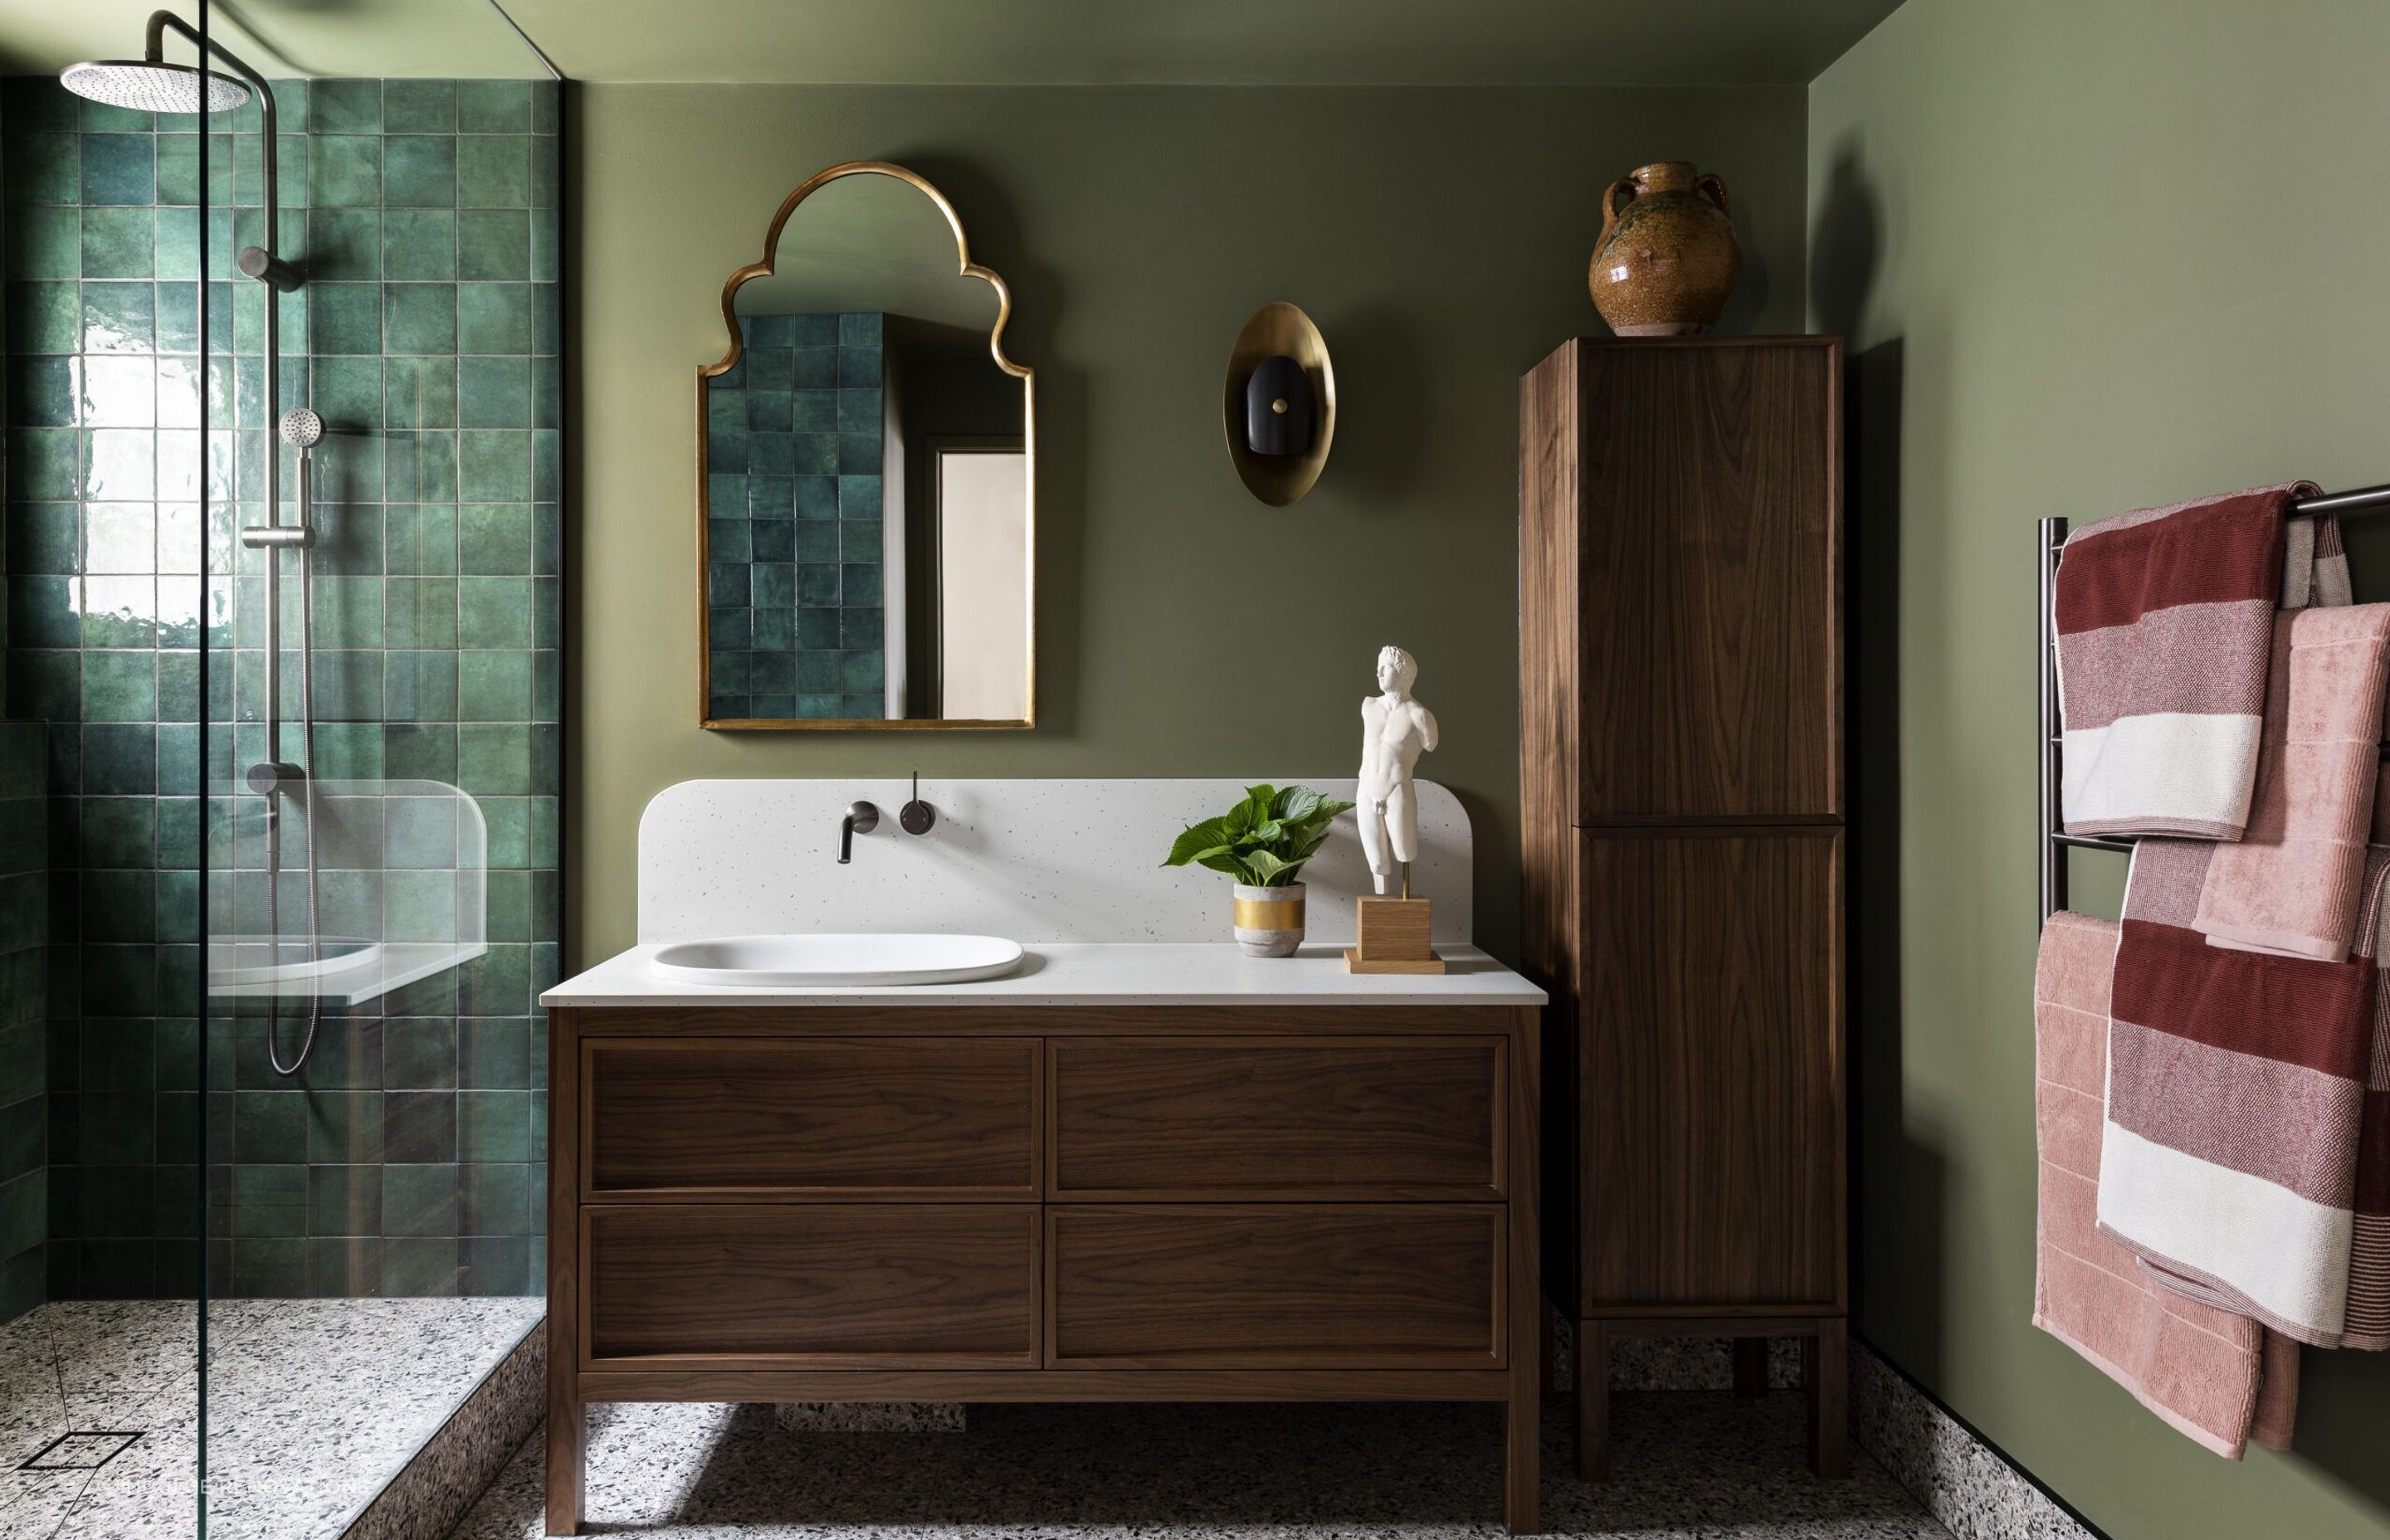 This beautiful framed bathroom mirror looks stunning in this traditionnally styled bathroom Featured project: The Windsor